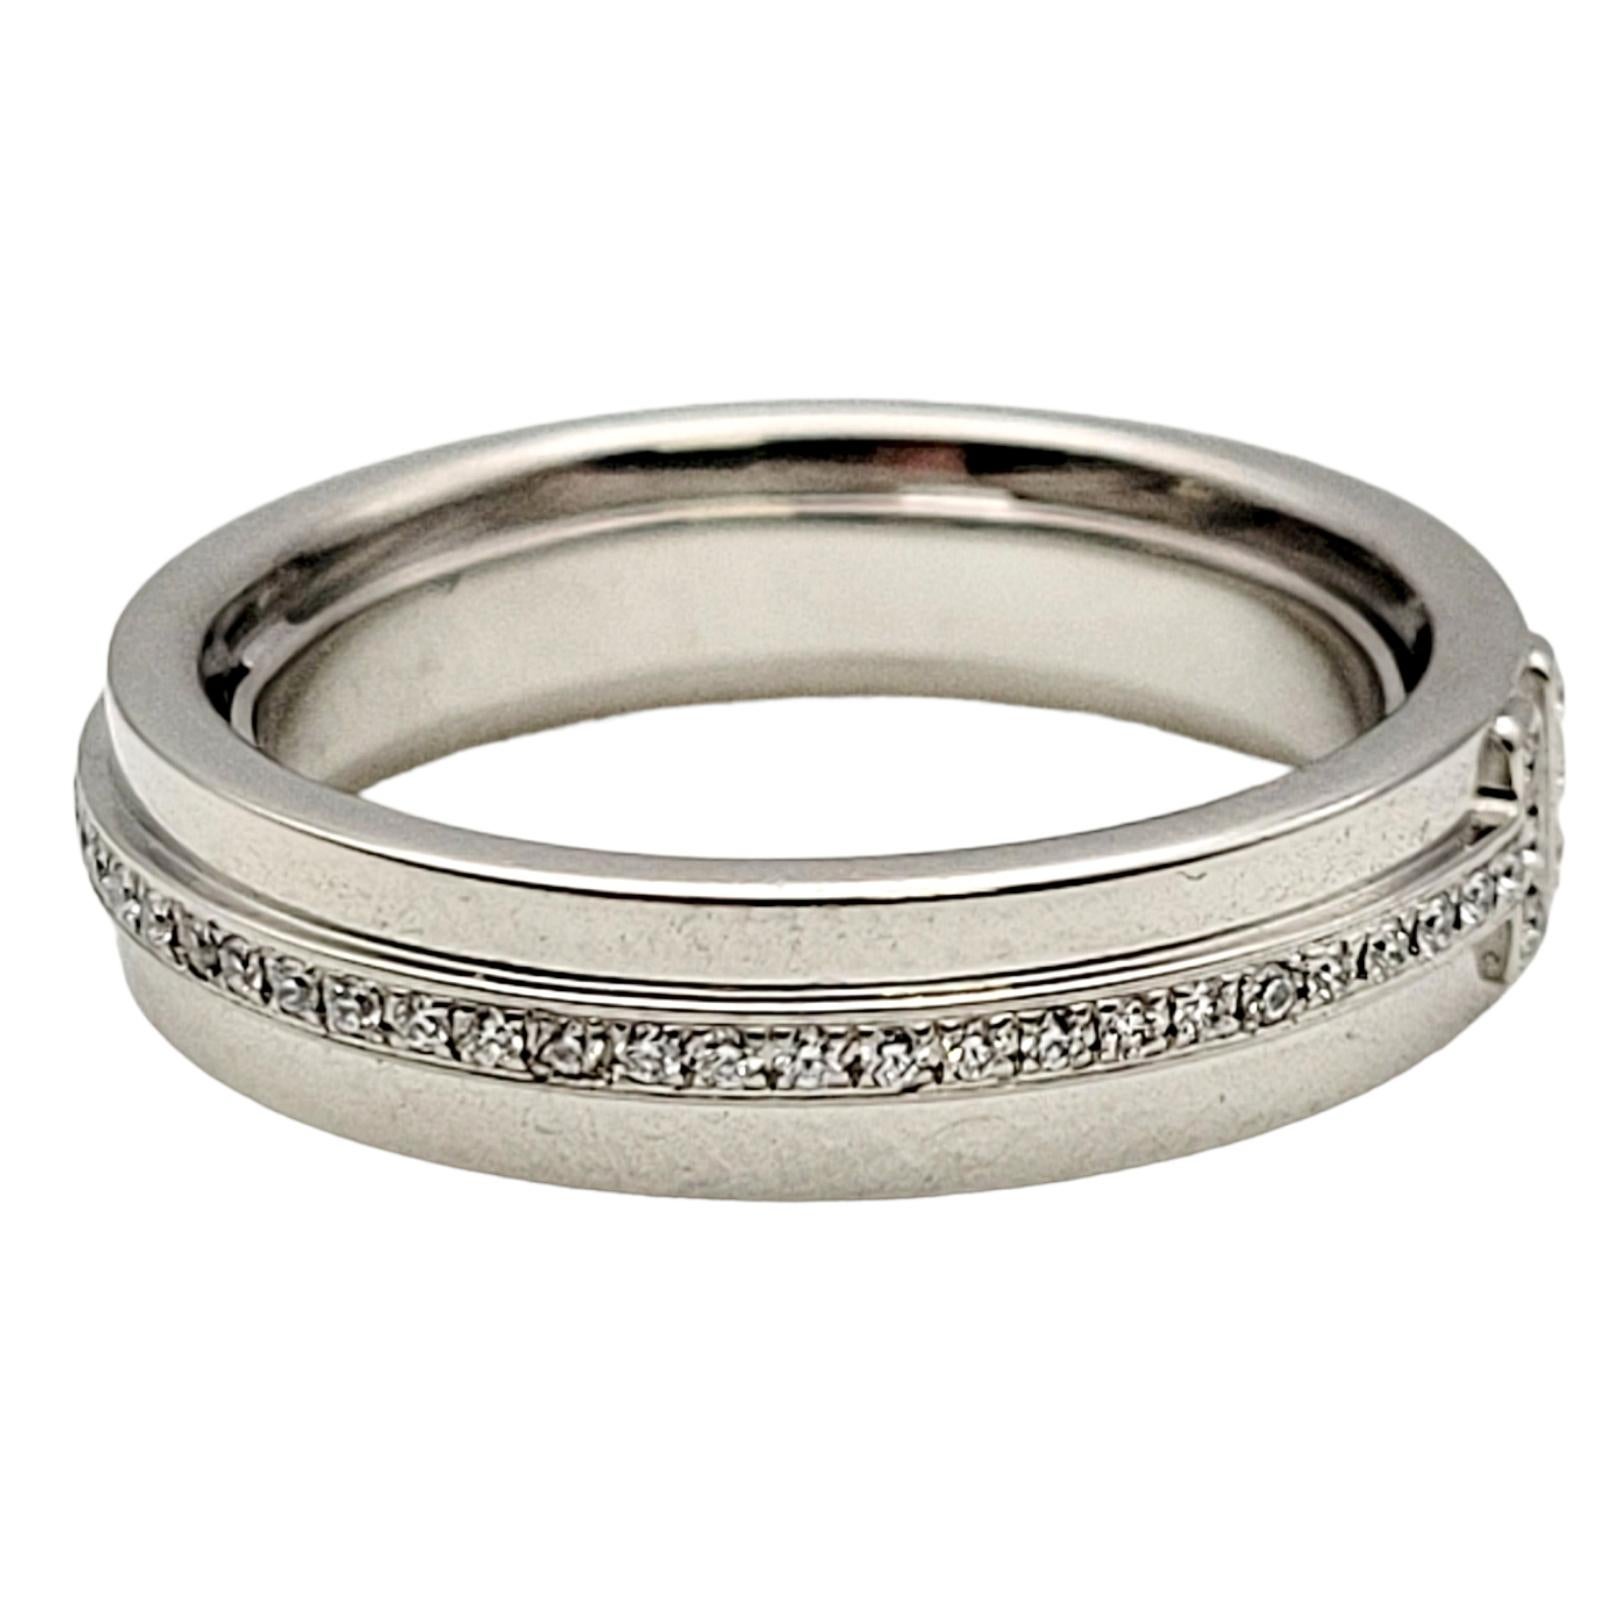 Tiffany & Co. Tiffany T Collection Narrow Diamond Ring in 18 Karat White Gold In Good Condition For Sale In Scottsdale, AZ